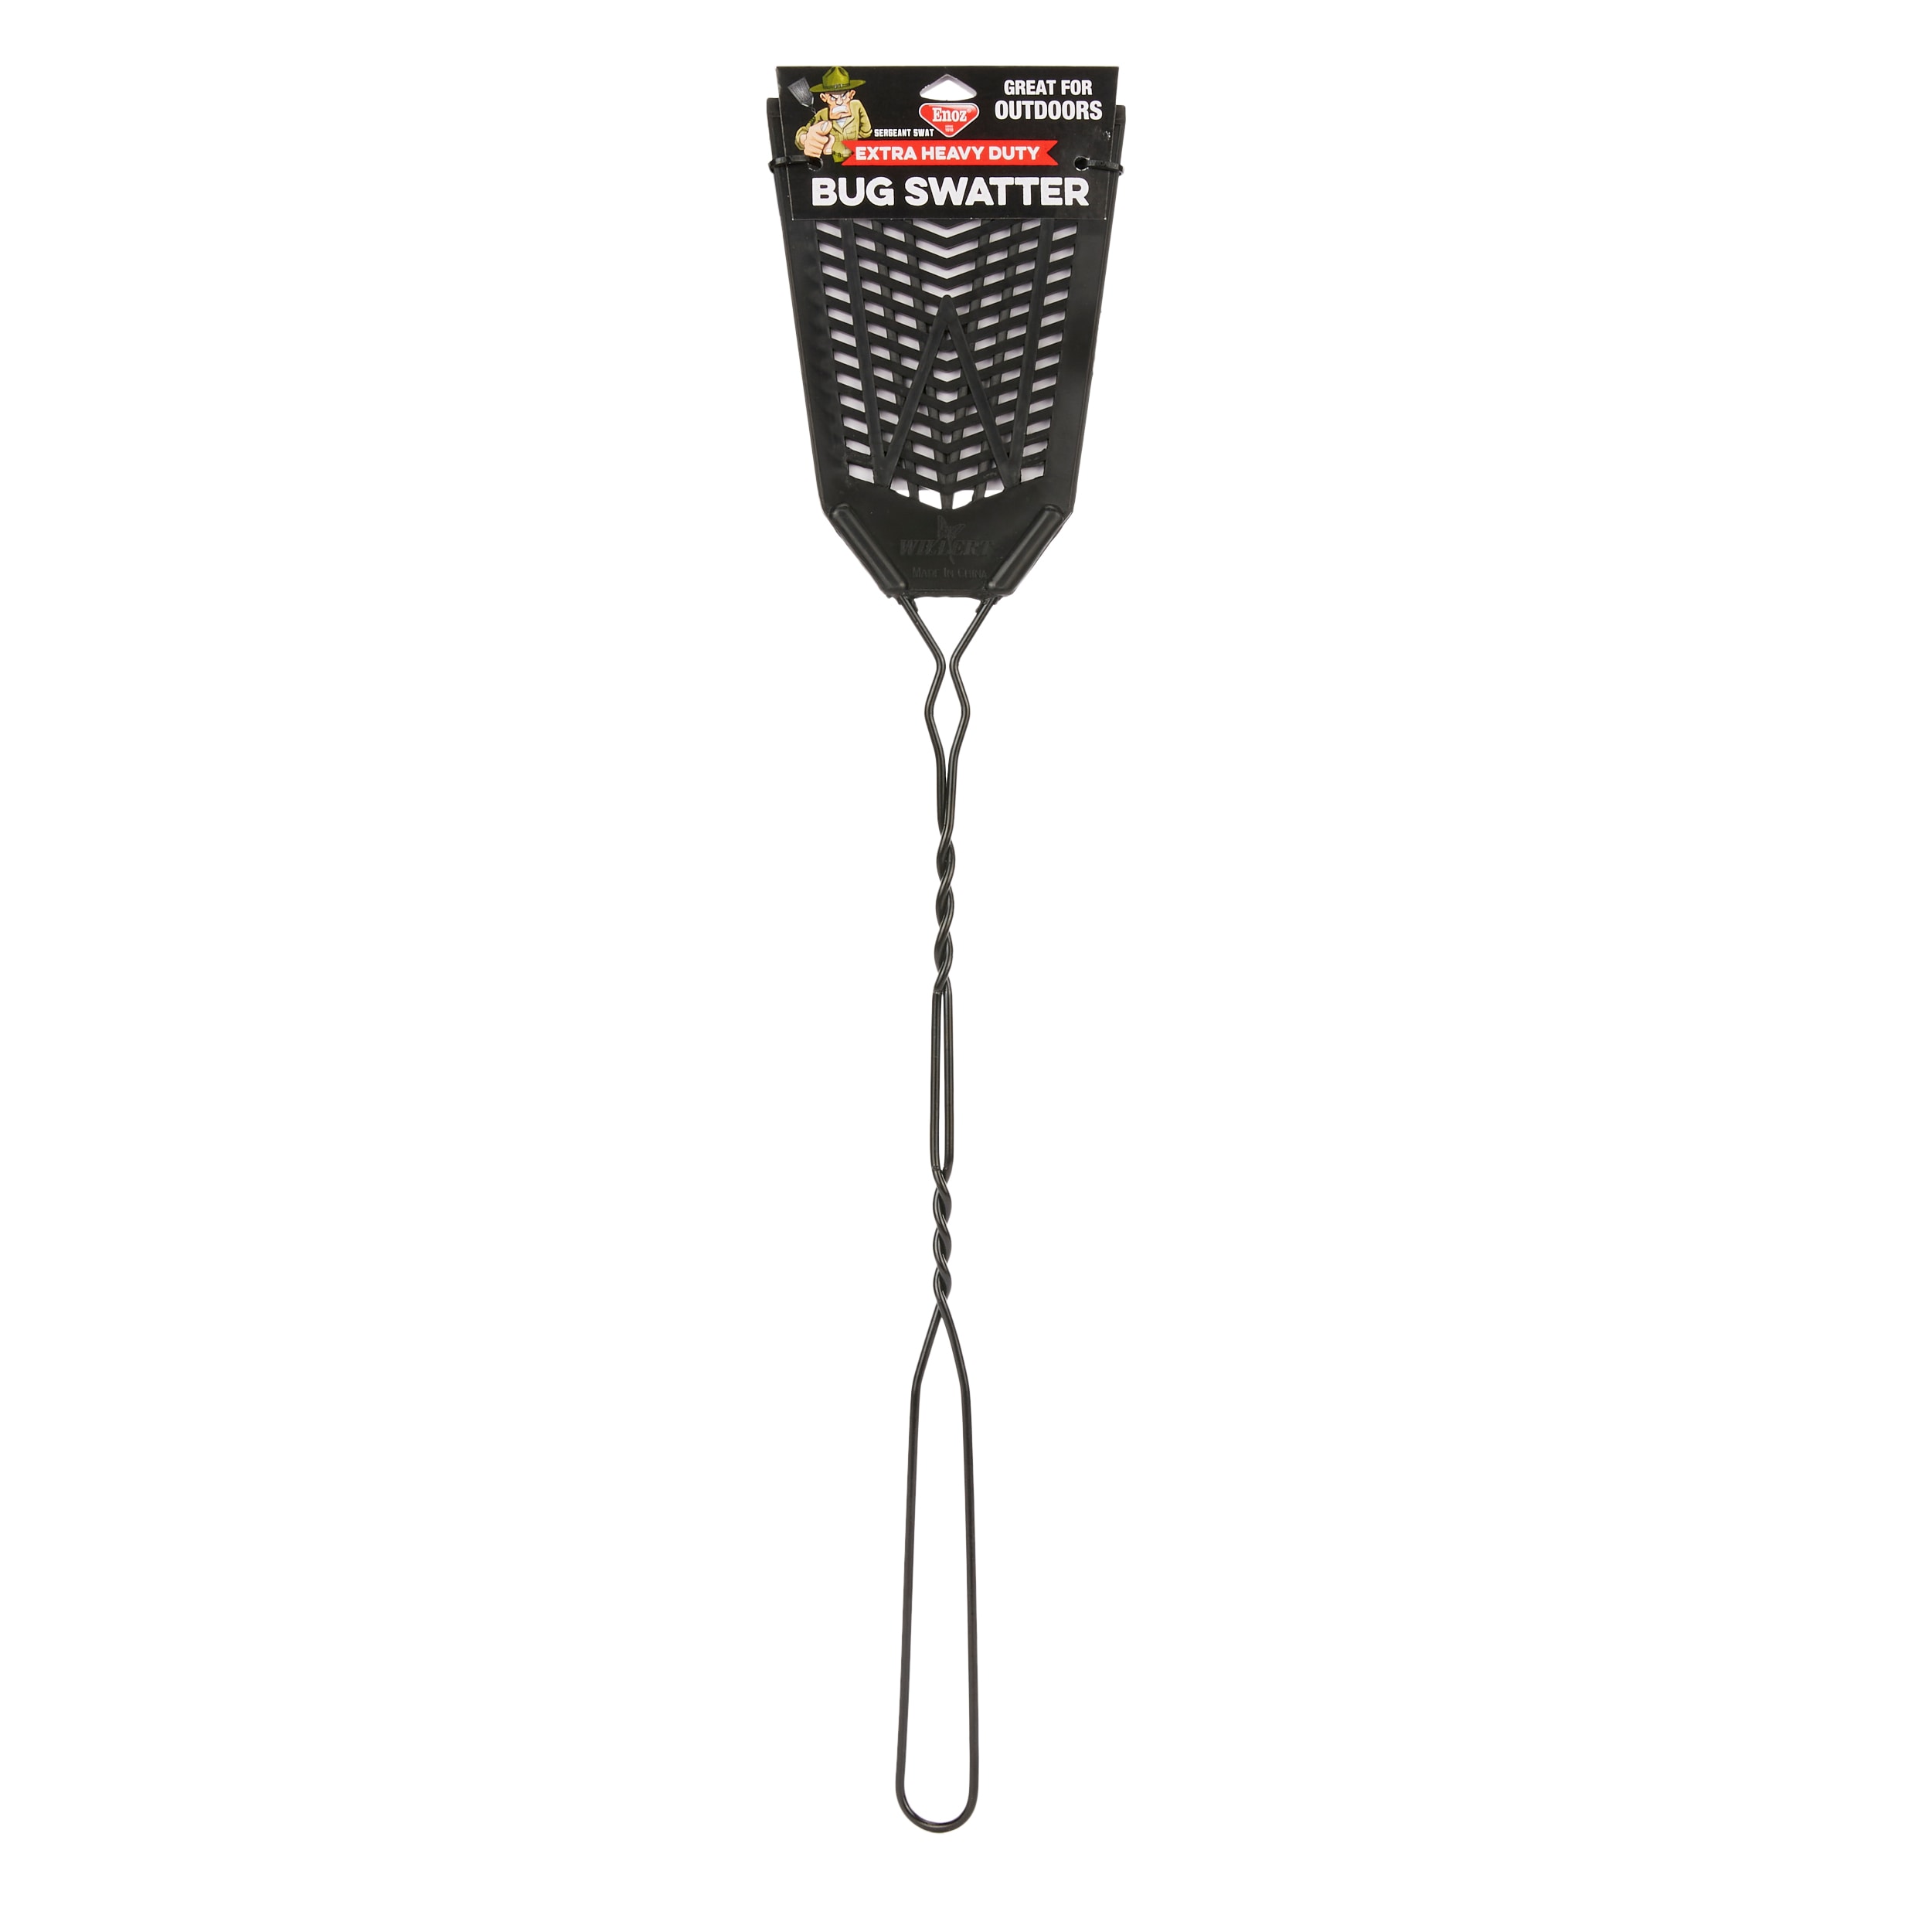  Black + Decker Electric Fly Swatter & Fly Zapper- Bug Zapper  Racket Indoor & Outdoor- Handheld, Heavy- Duty Mosquito Swatter, Battery-  Powered, Non- Toxic Safe for Humans & Pets Fly Swatters